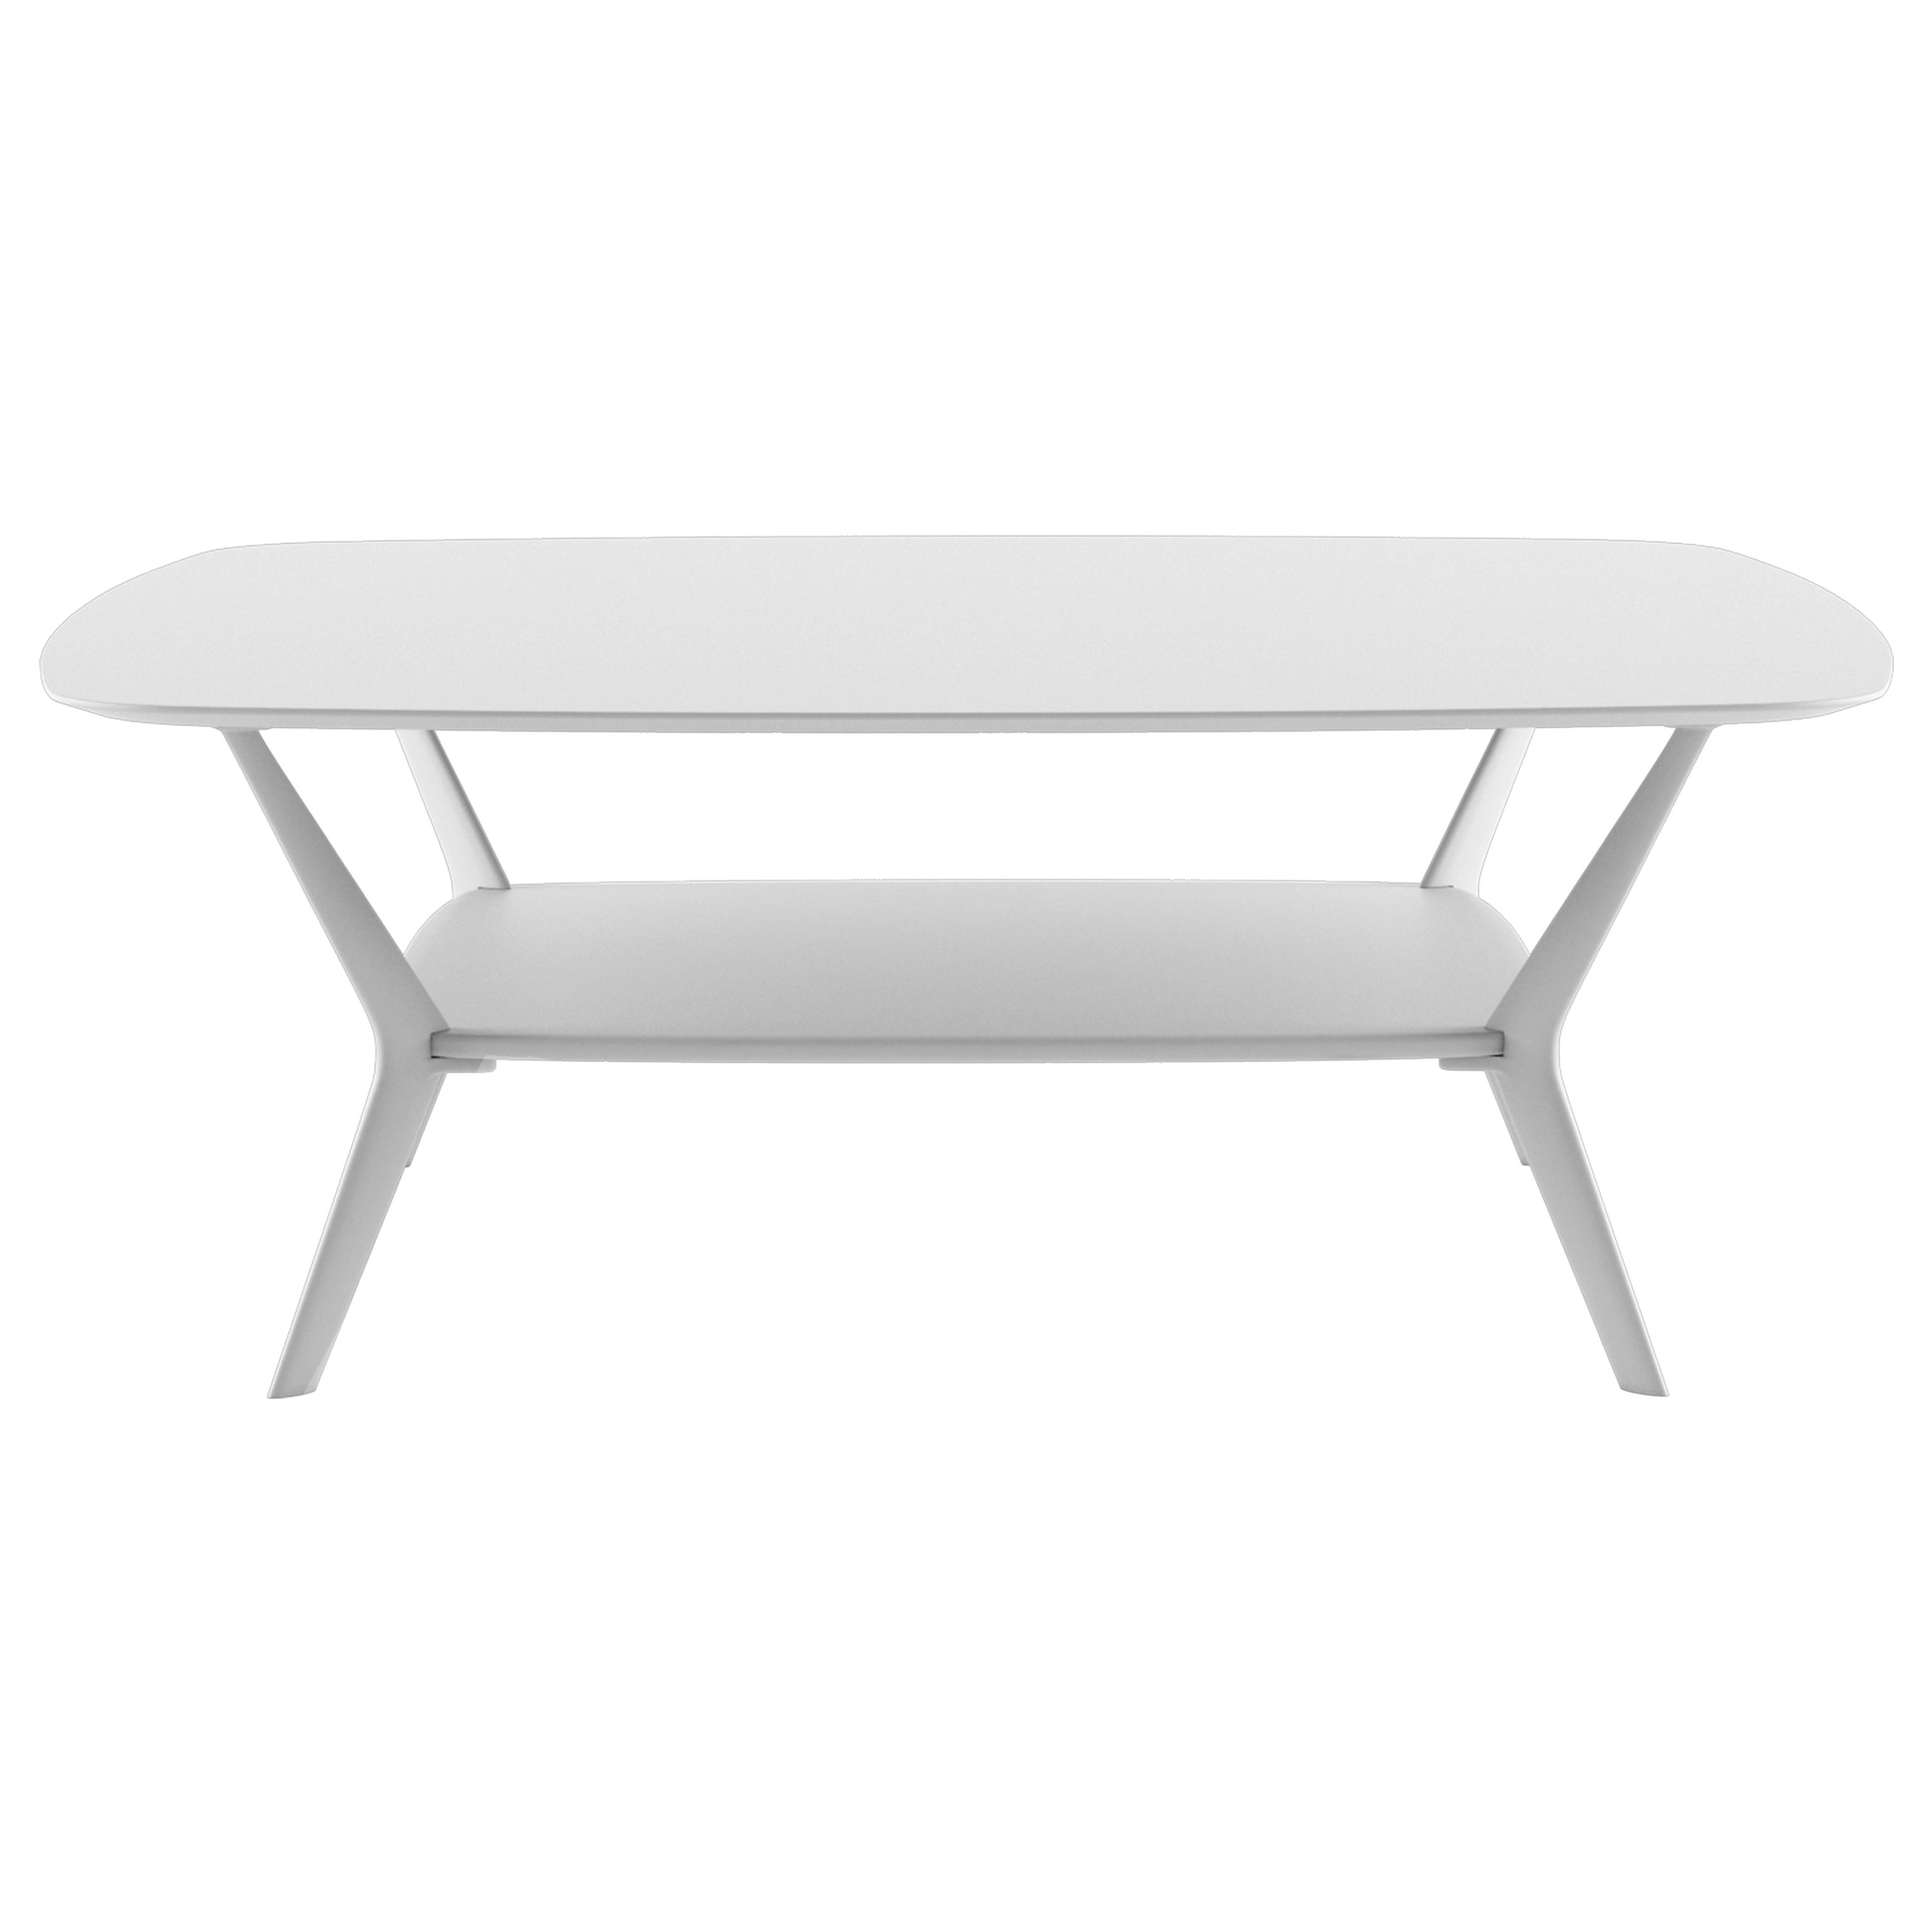 Alias B04 Biplane XS 95x95 Outdoor Table in White Top and Lacquered Frame